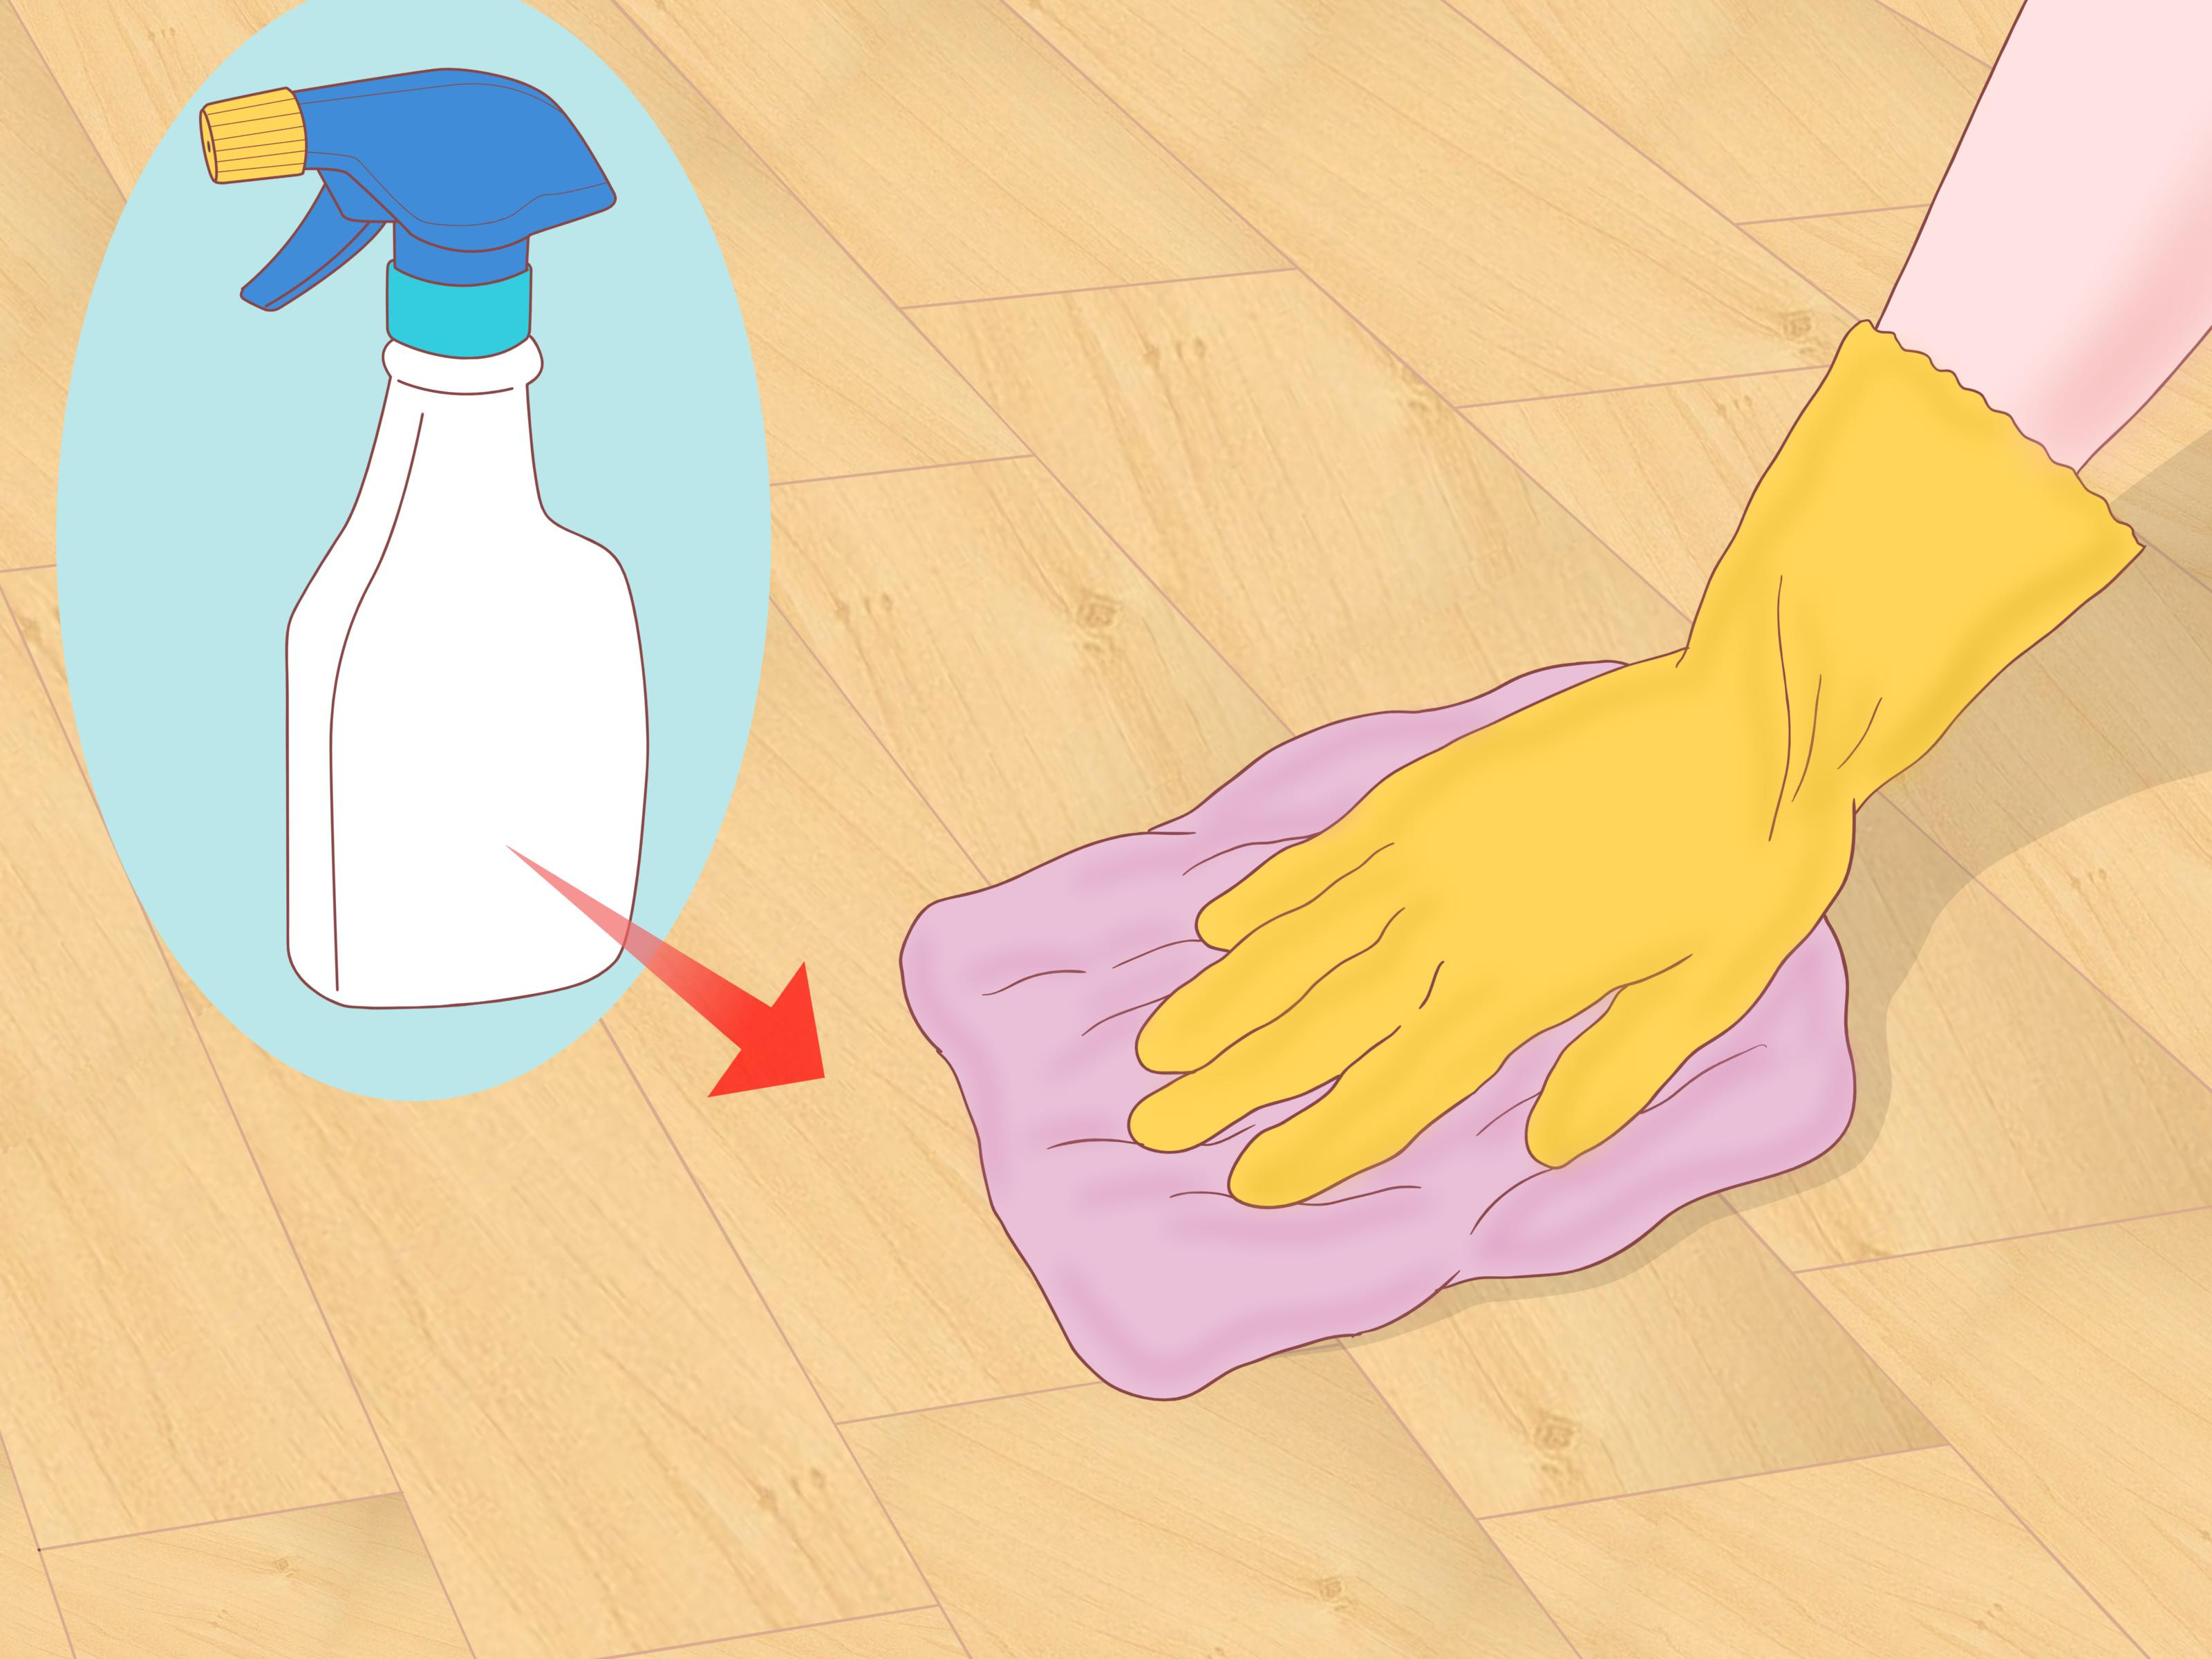 hardwood flooring company sandyford of 3 ways to clean parquet floors wikihow within clean parquet floors step 12